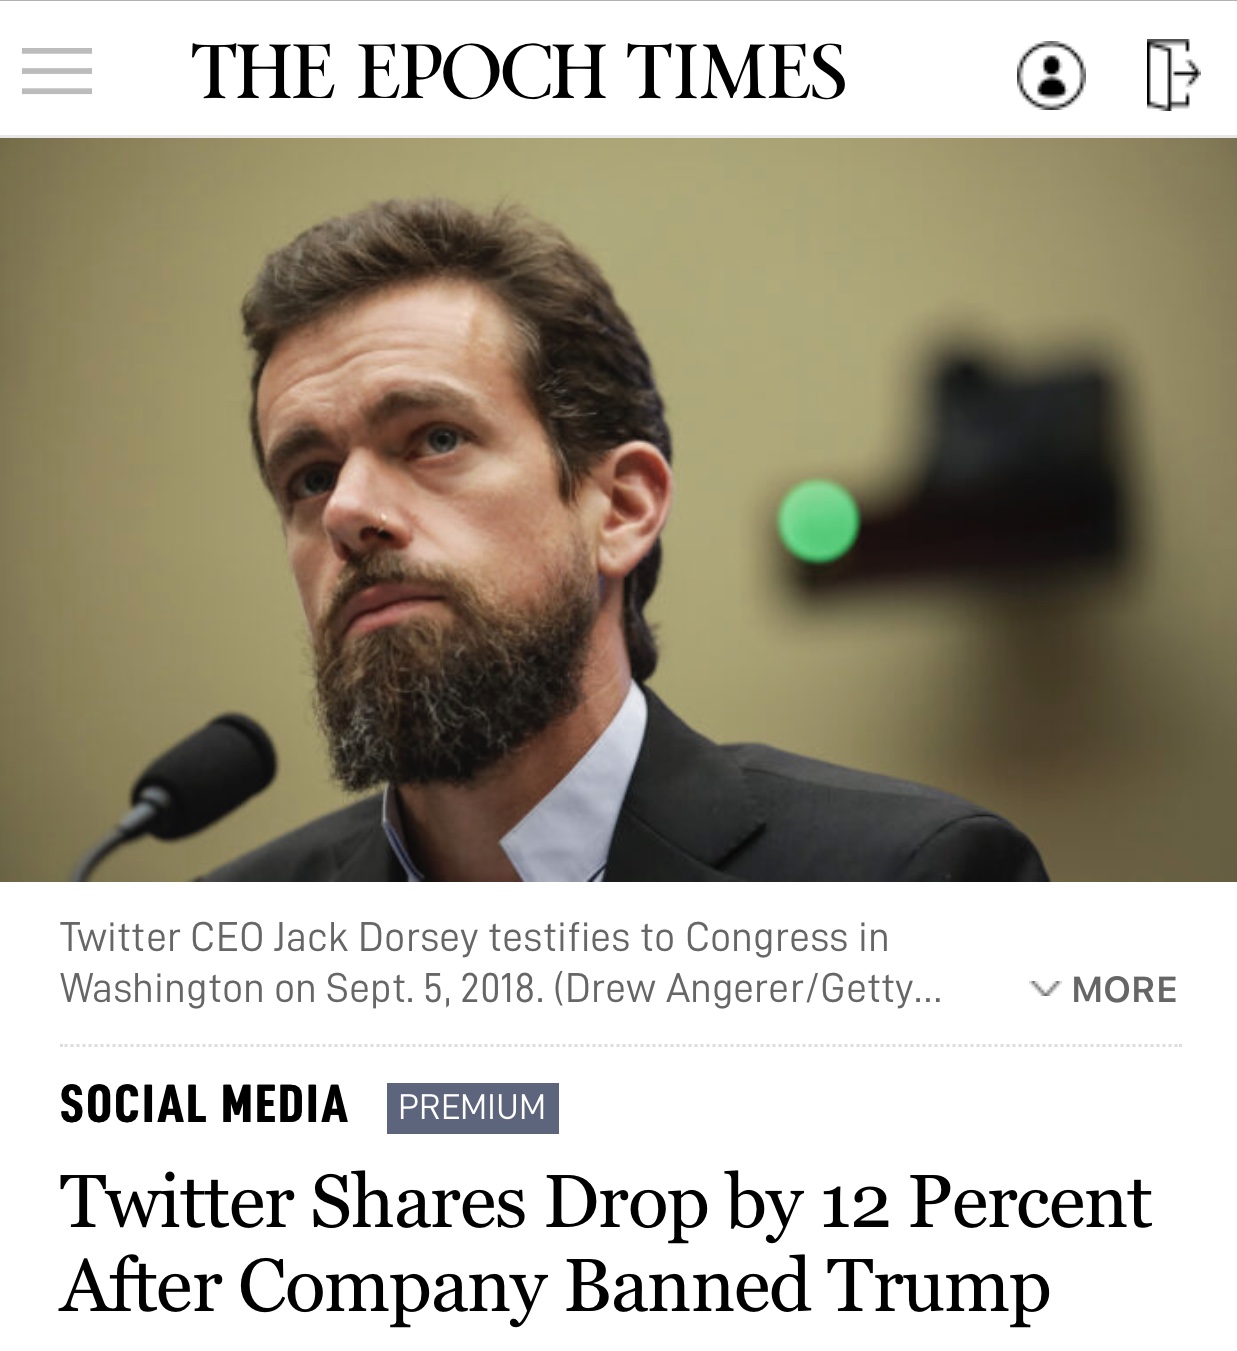 Twitter Shares Drop by 12 Percent After Company Banned Trump